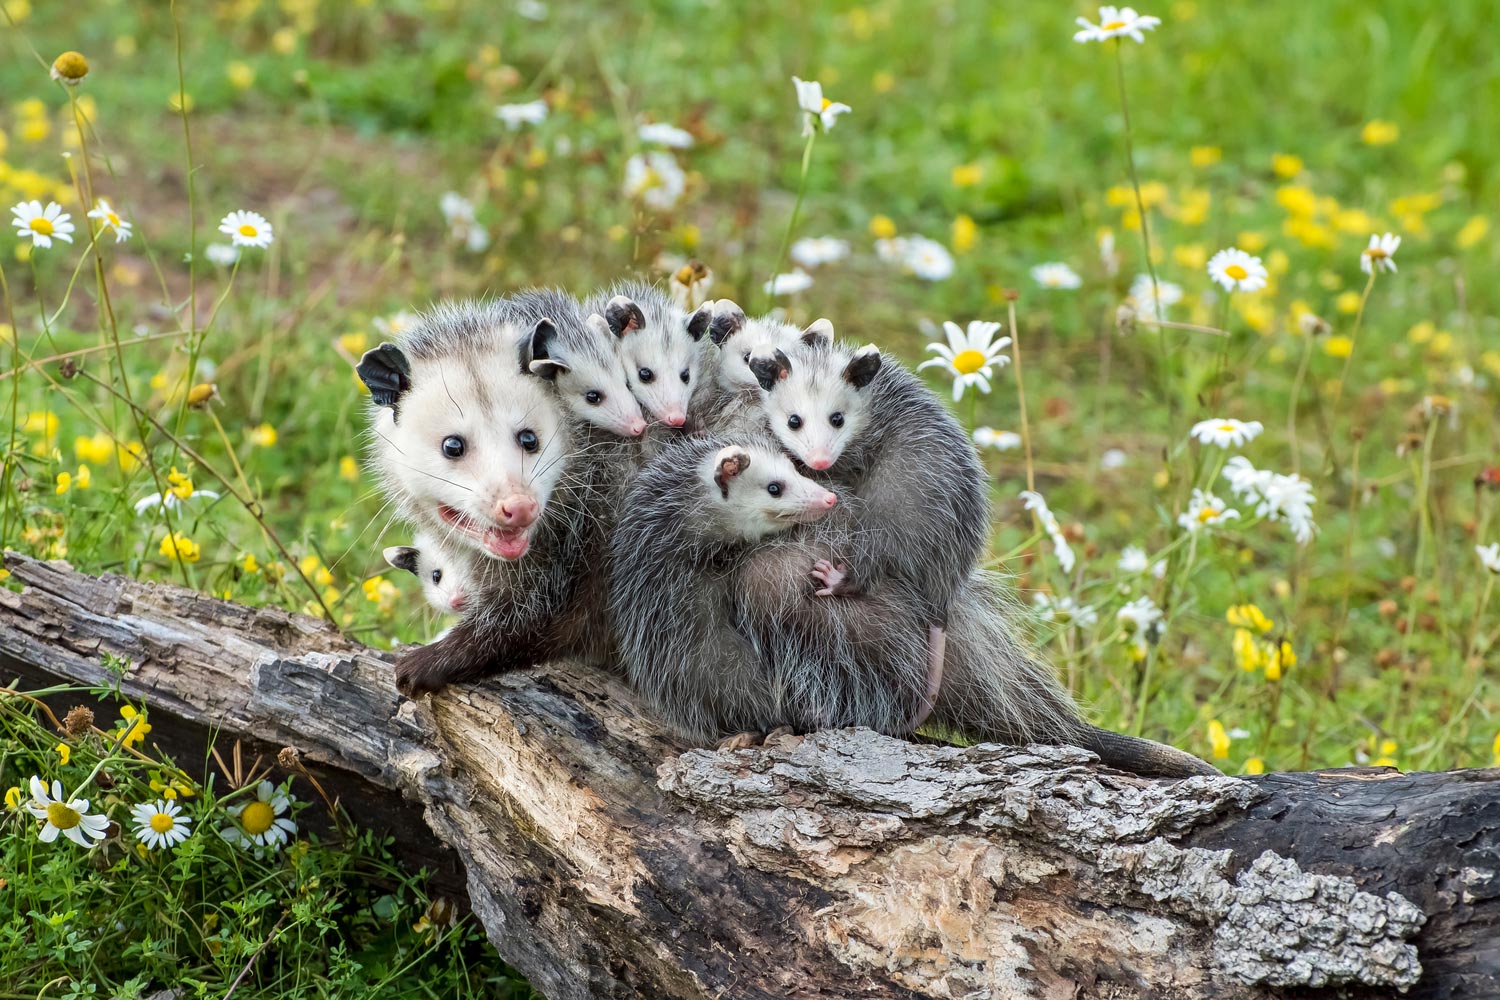 Baby opossums on their mother's back